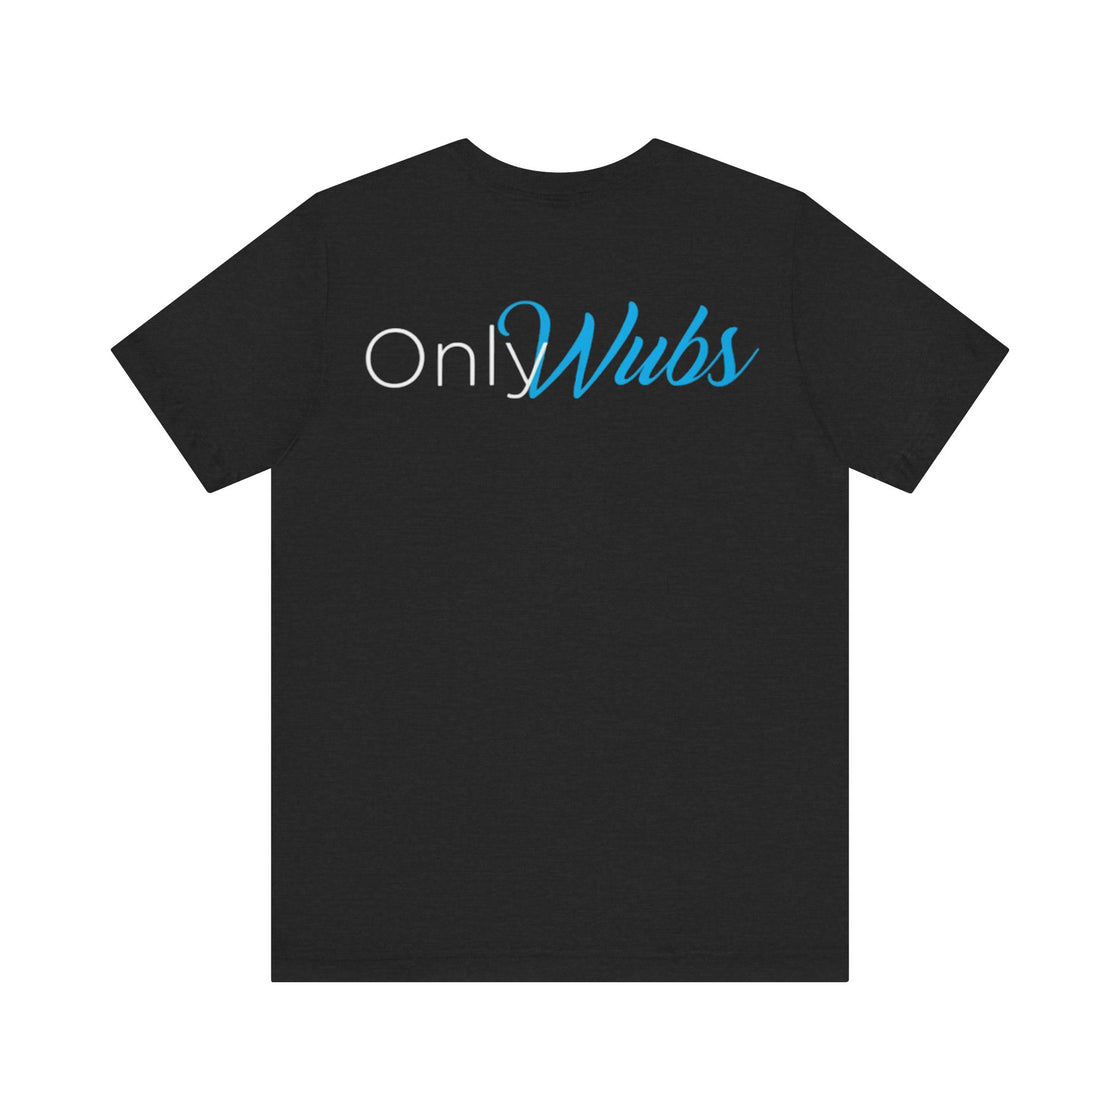 OnlyWubs Shirt - Dubstep shirt, rave shirt, festival shirt, lost lands, excision, festival outfit